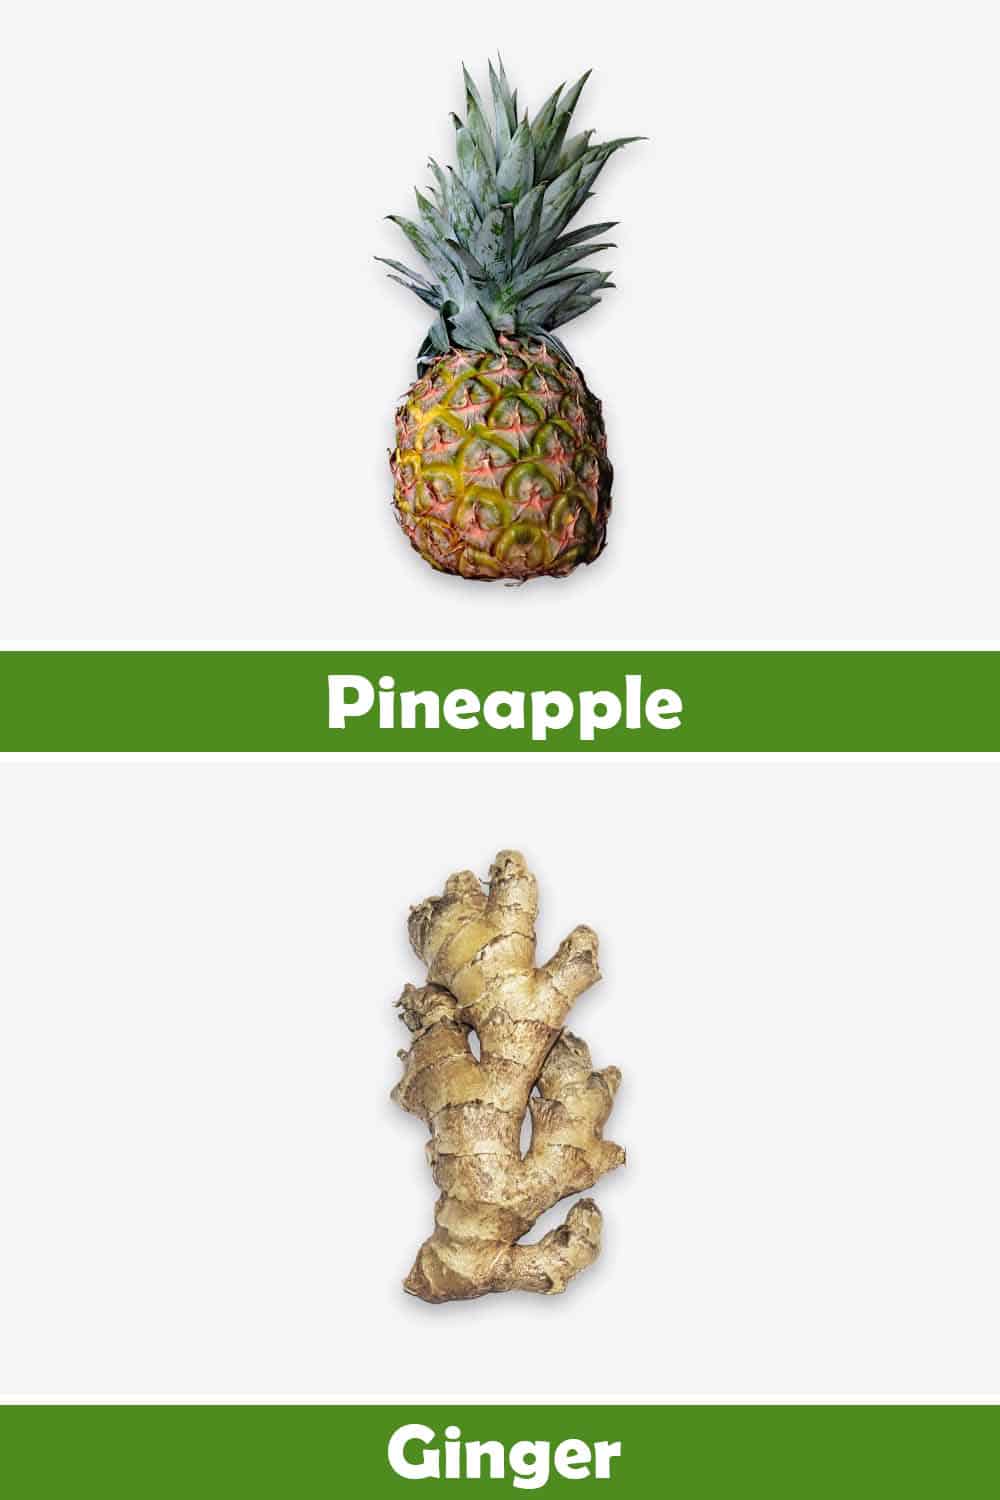 PINEAPPLE AND GINGER